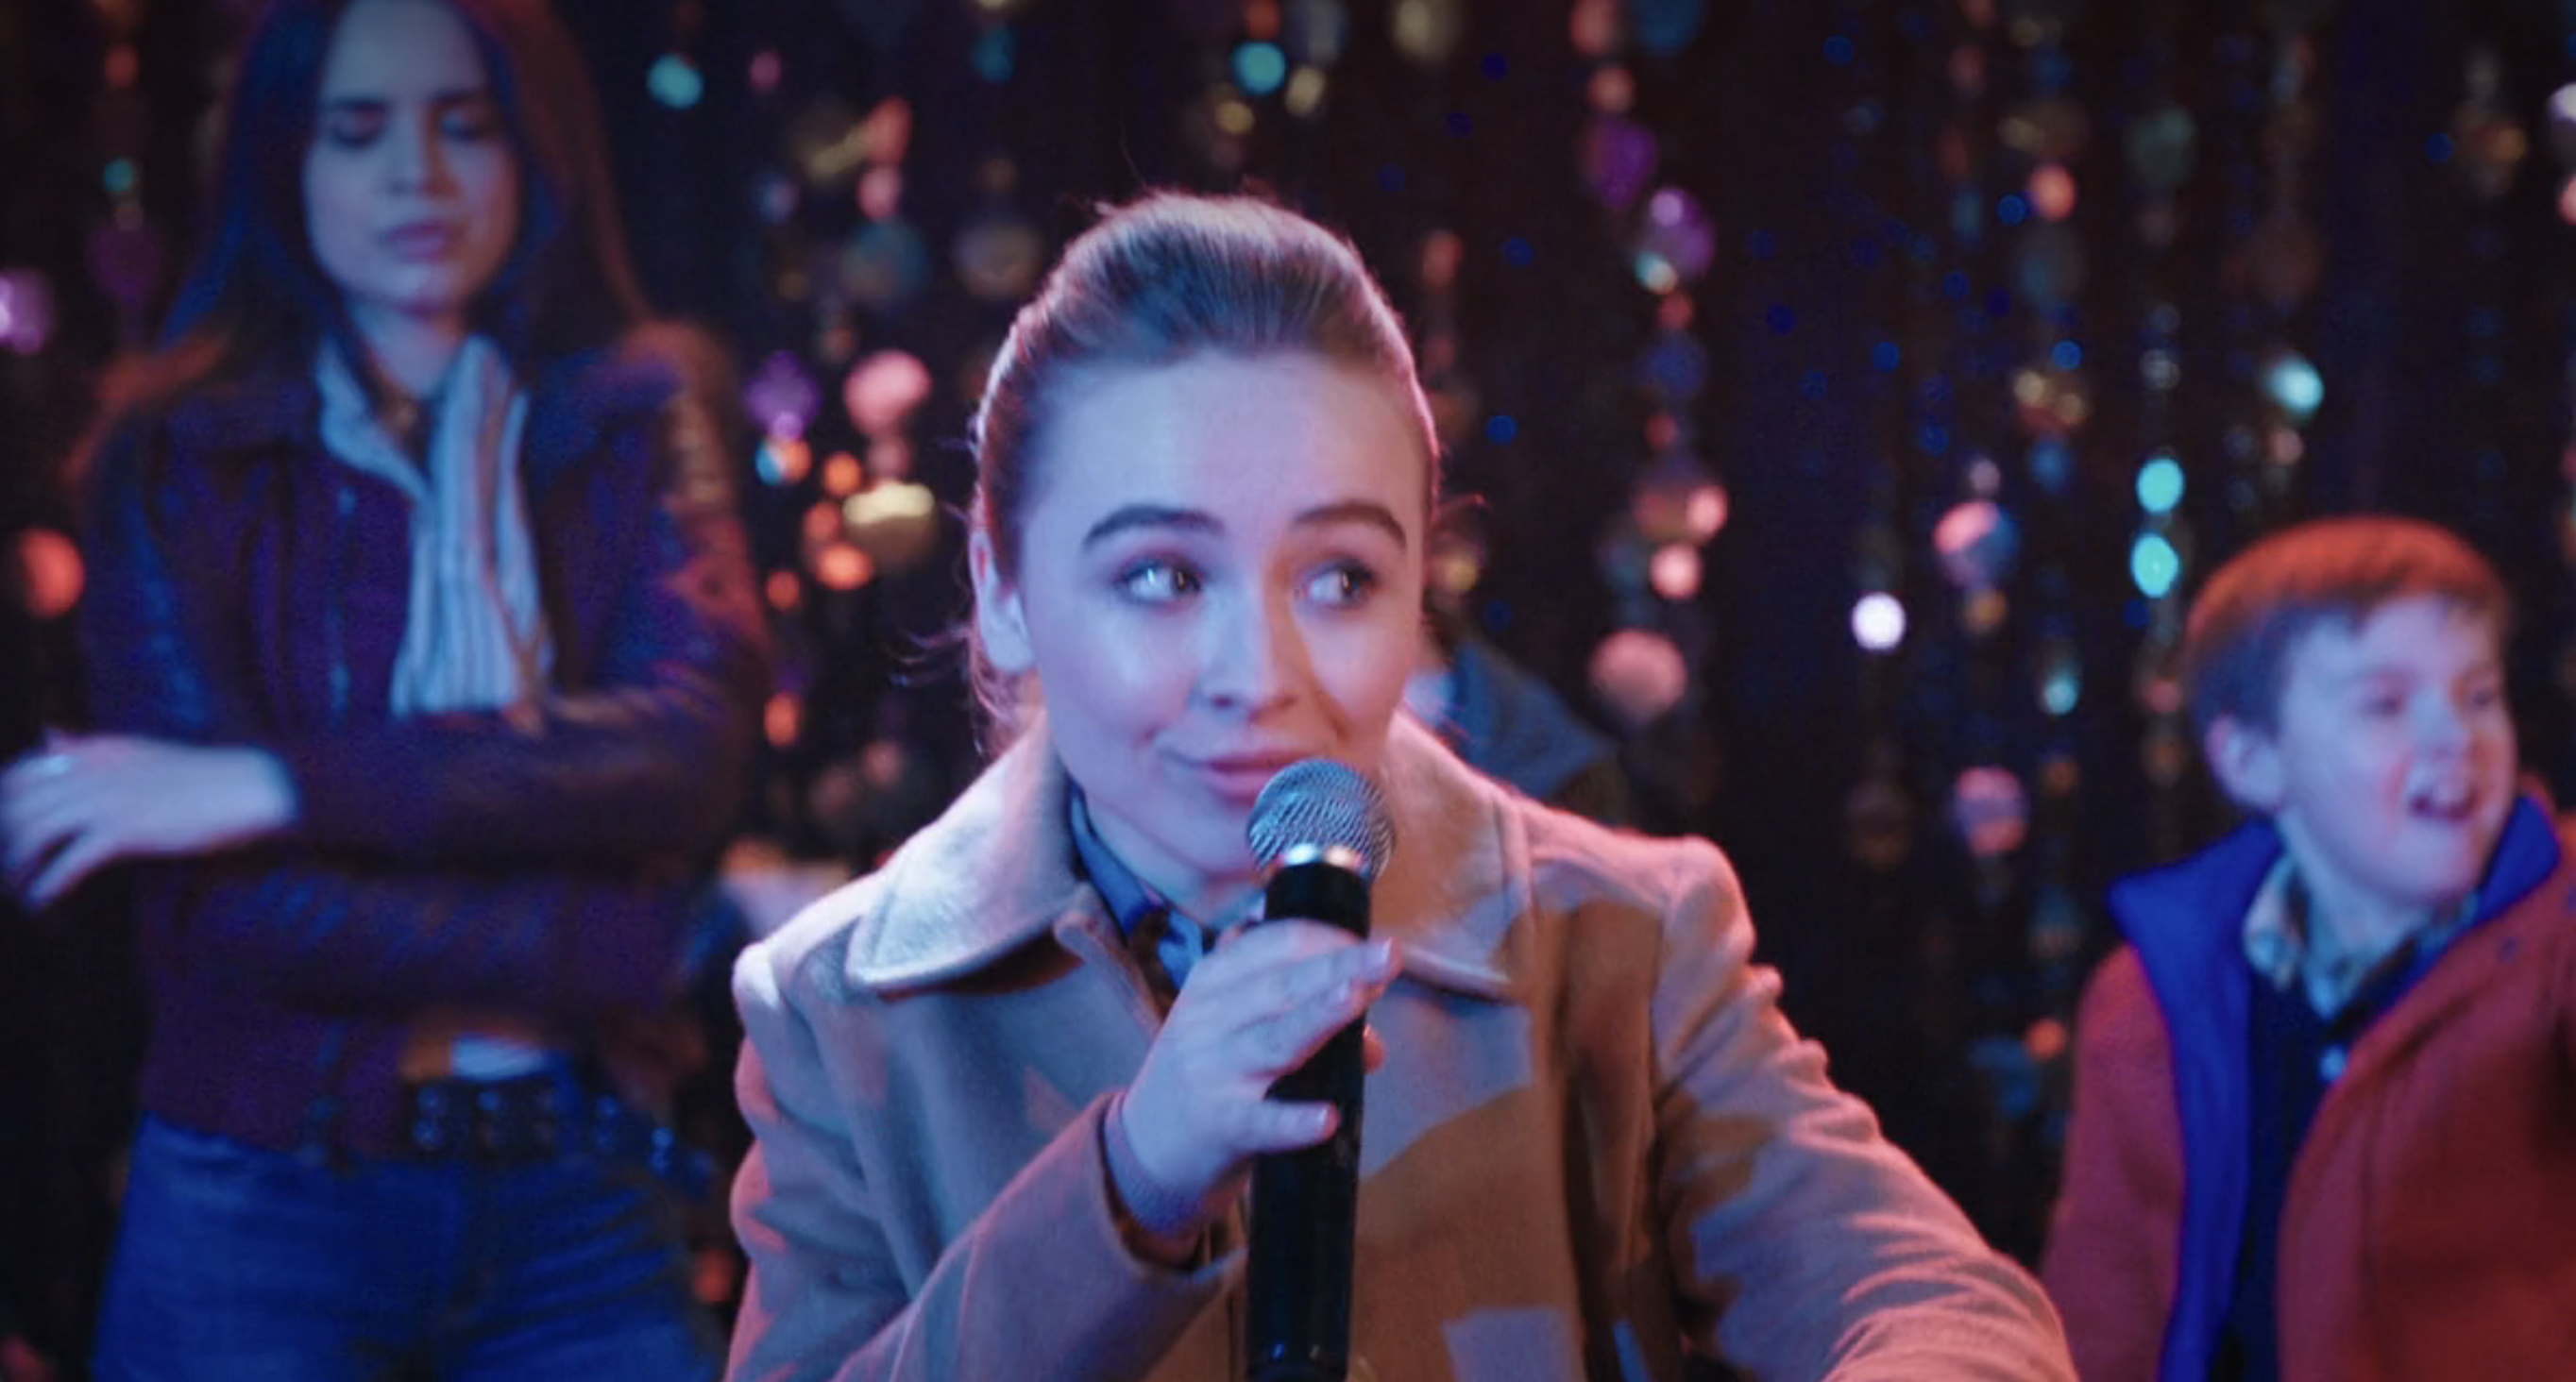 in a scene, Sabrina rapping into a microphone with a crowd in the background